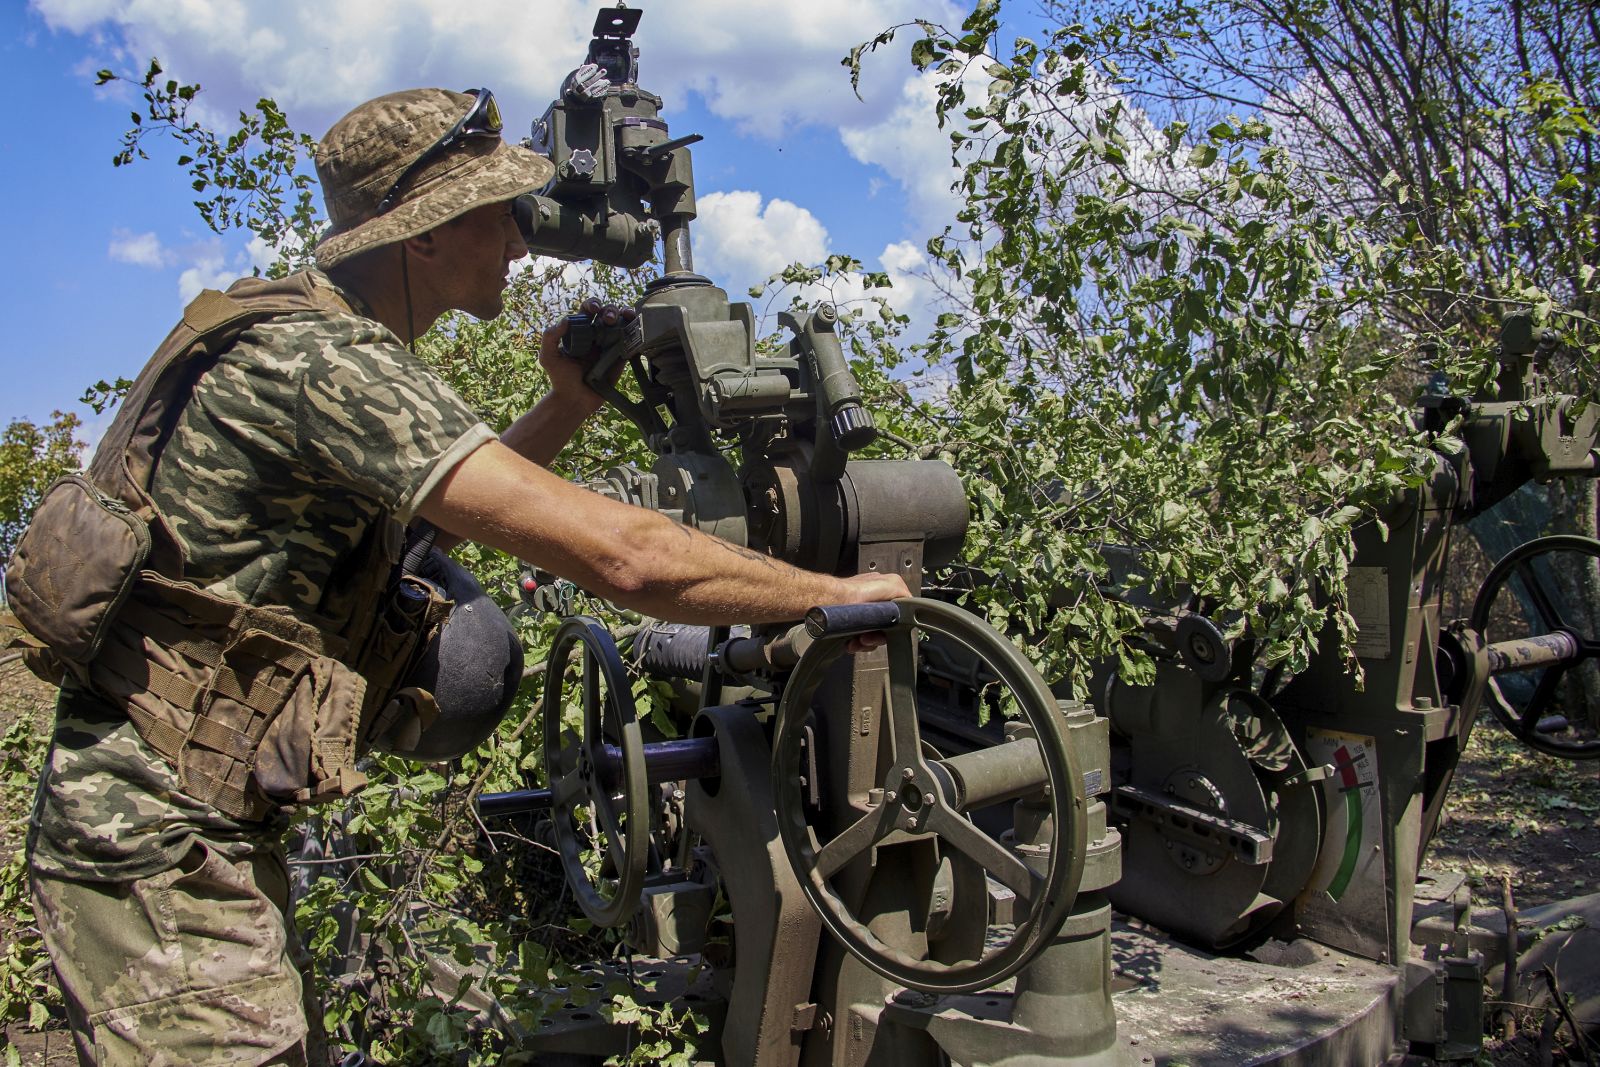 epa10096192 Ukrainian servicemen operate with American-made 155mm M777 towed howitzer on their positions in the Kharkiv area, Ukraine, 28 July 2022. Russian troops on 24 February entered Ukrainian territory, starting a conflict that has provoked destruction and a humanitarian crisis.  EPA/SERGEY KOZLOV